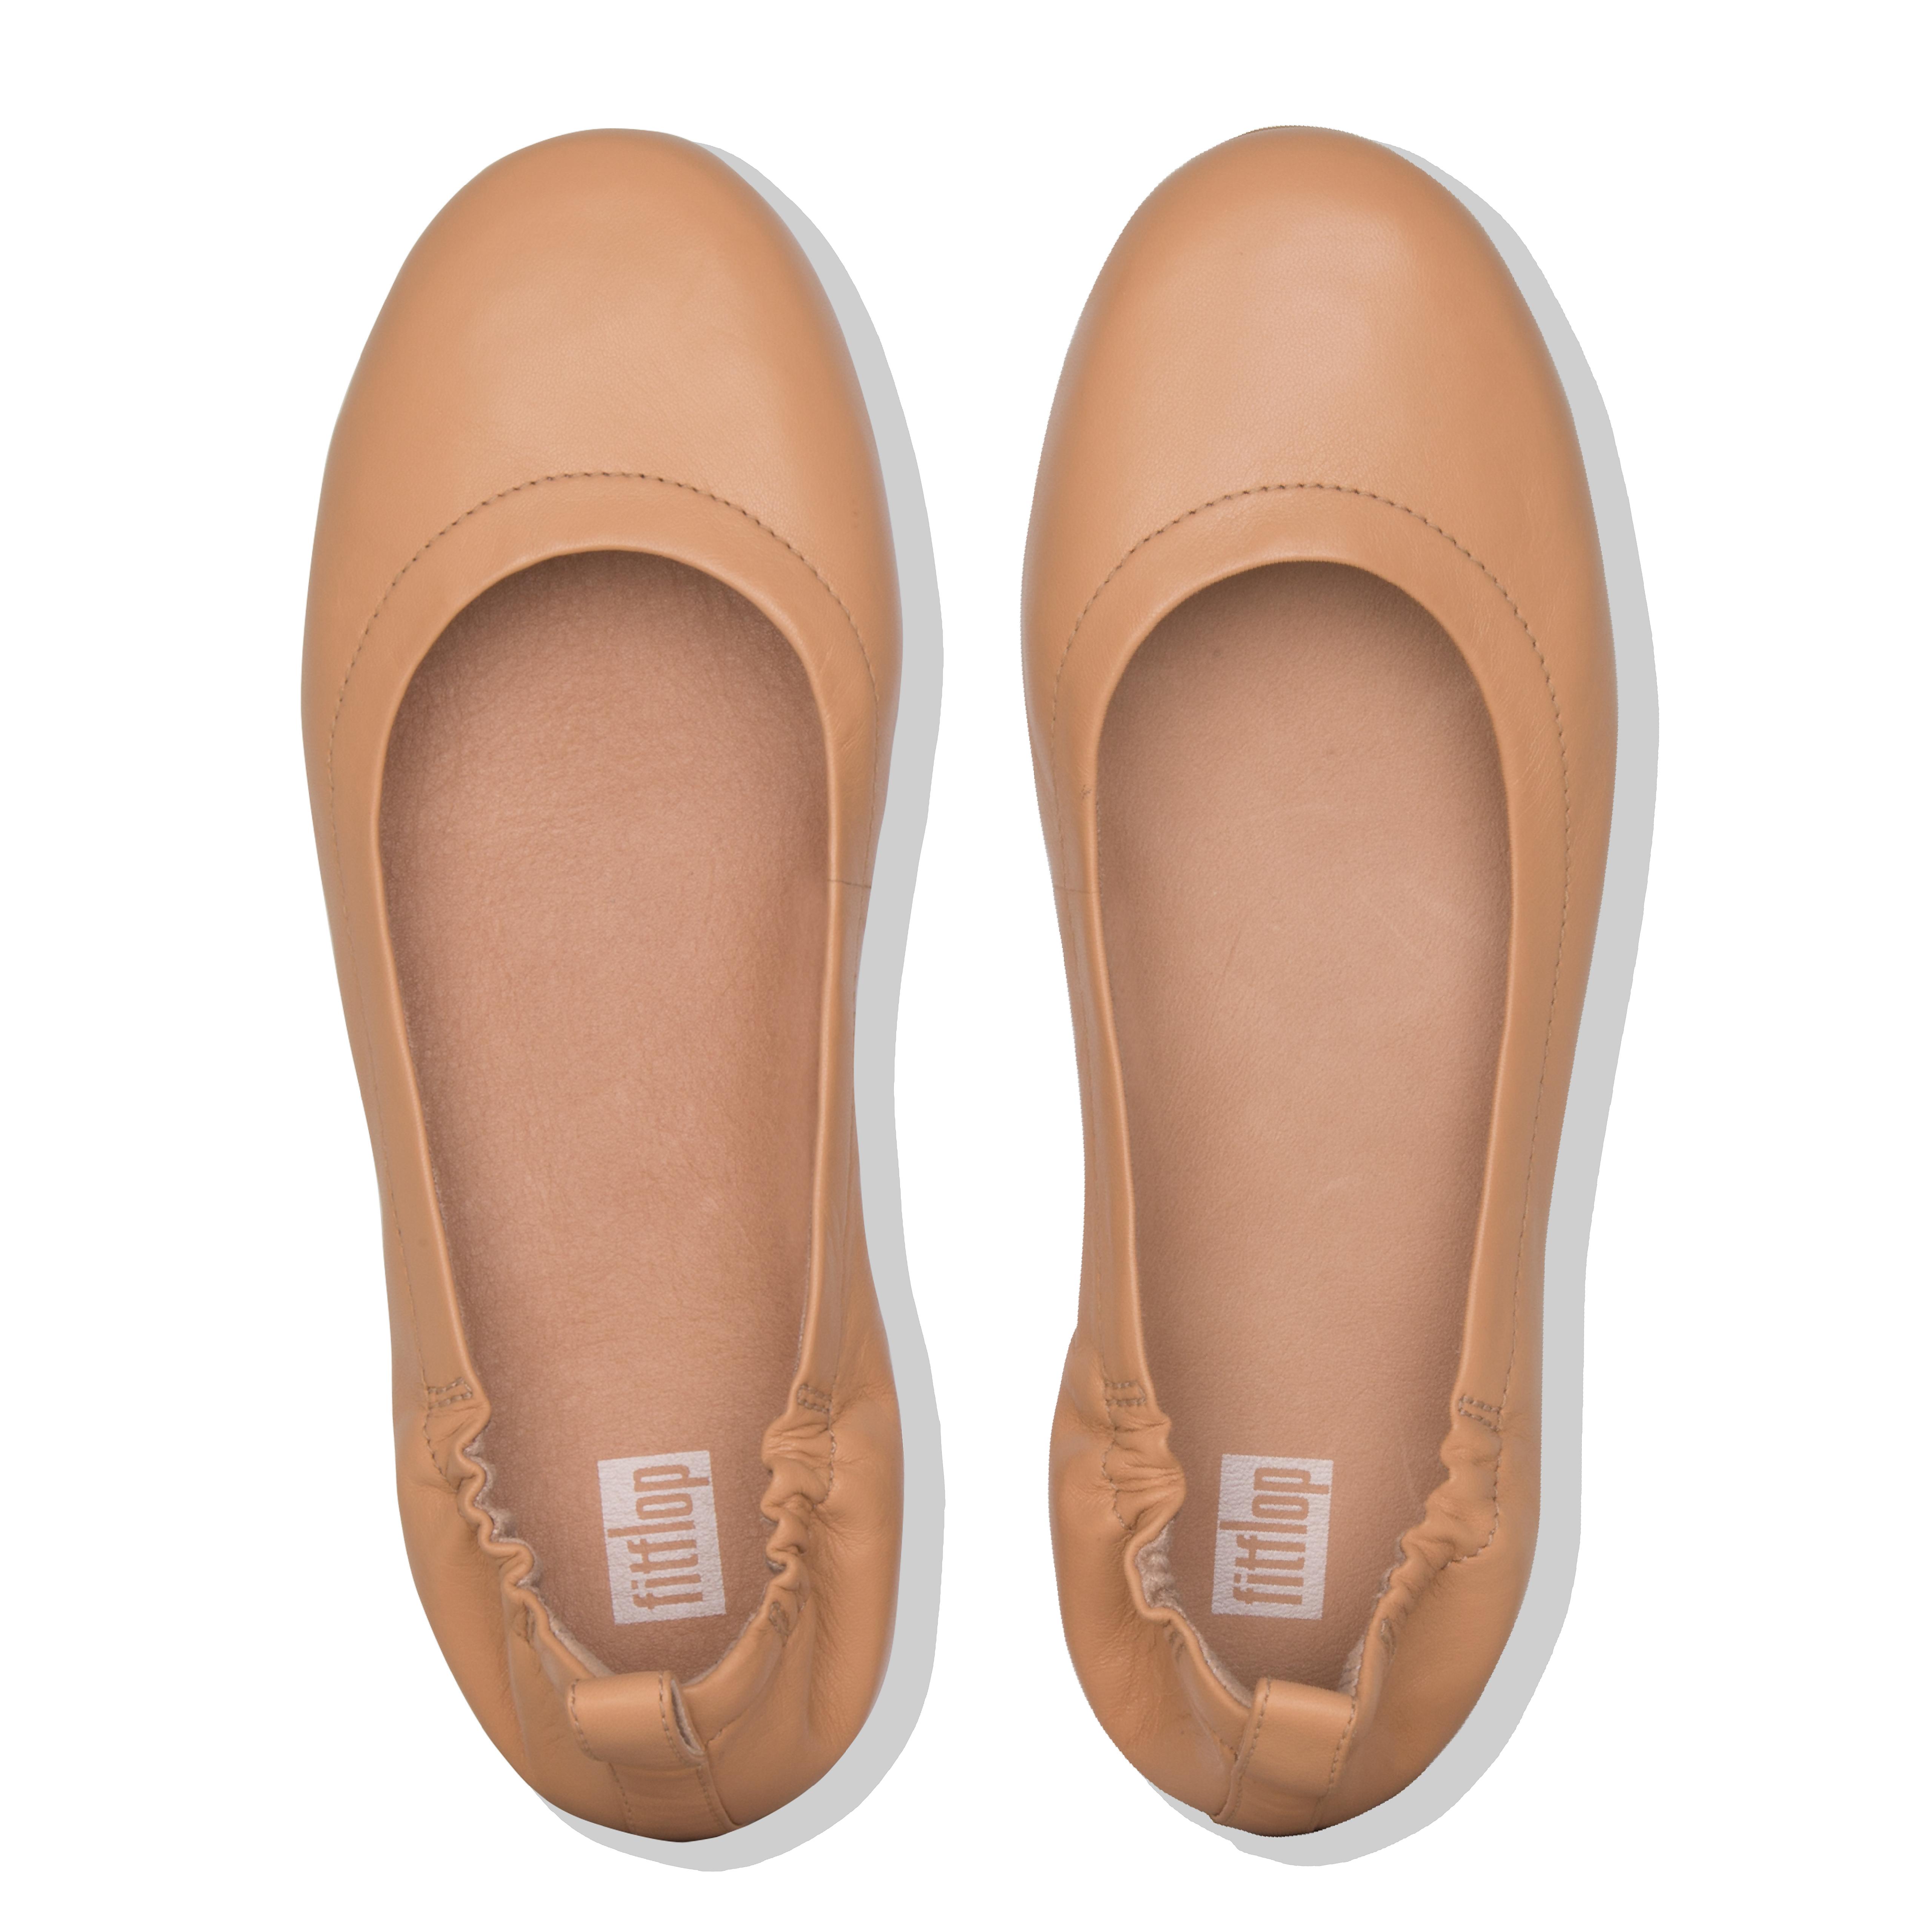 fitflop ballerina shoes